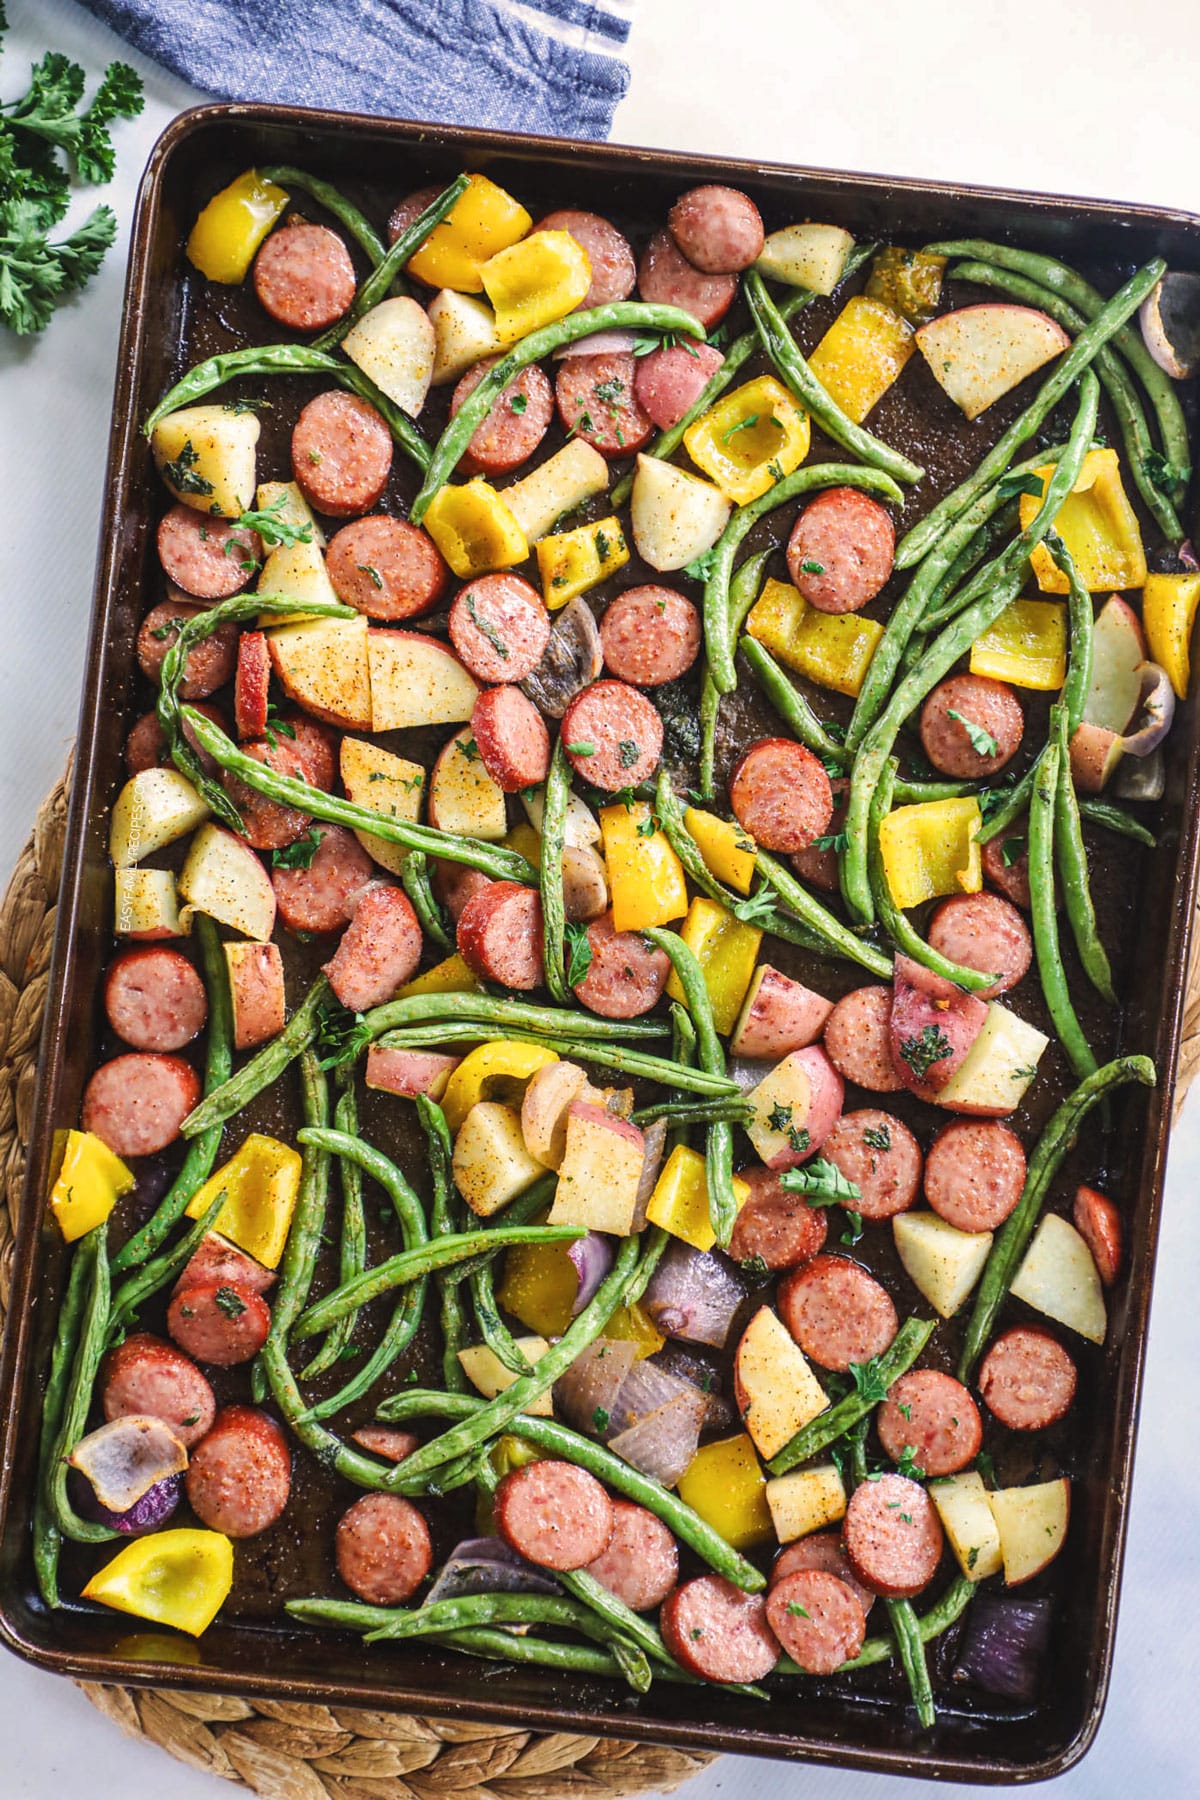 Cajun Smoked Sausage and Roasted Potatoes and vegetables prepared on a sheet pan.